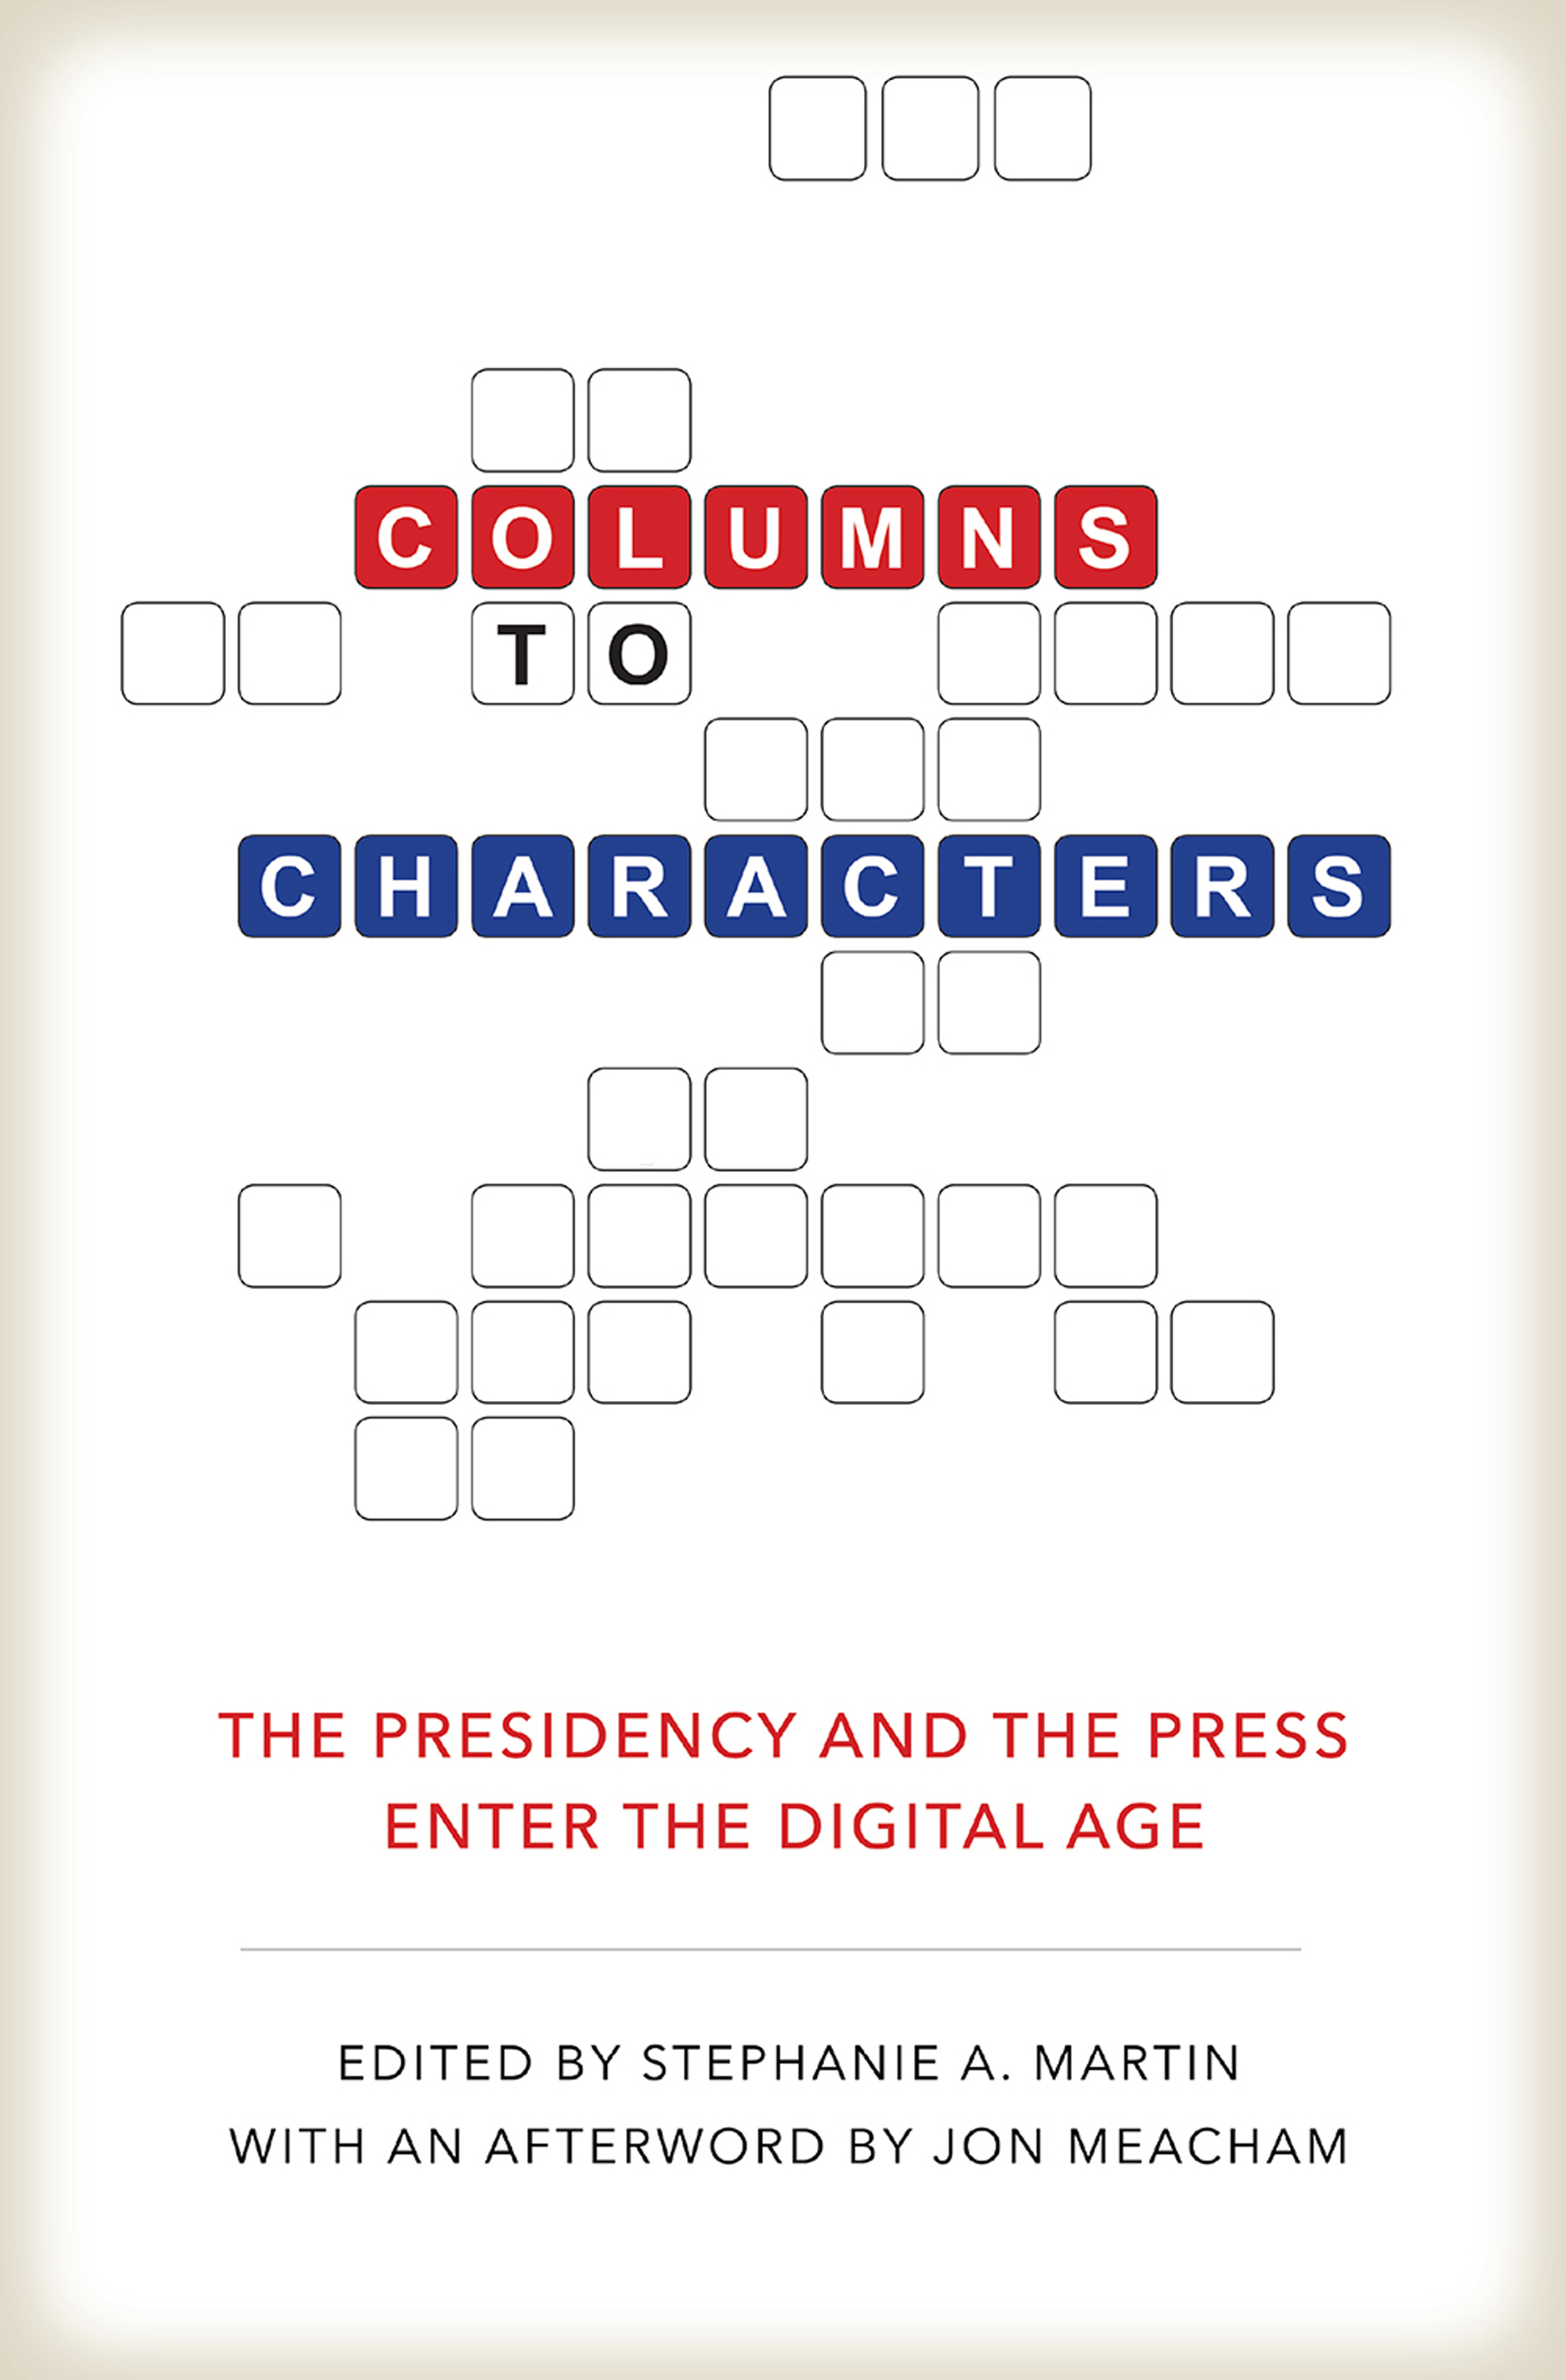 Columns to Characters: The Presidency and the Press Enter the Digital Age by professor of communication and public affairs Stephanie Martin.